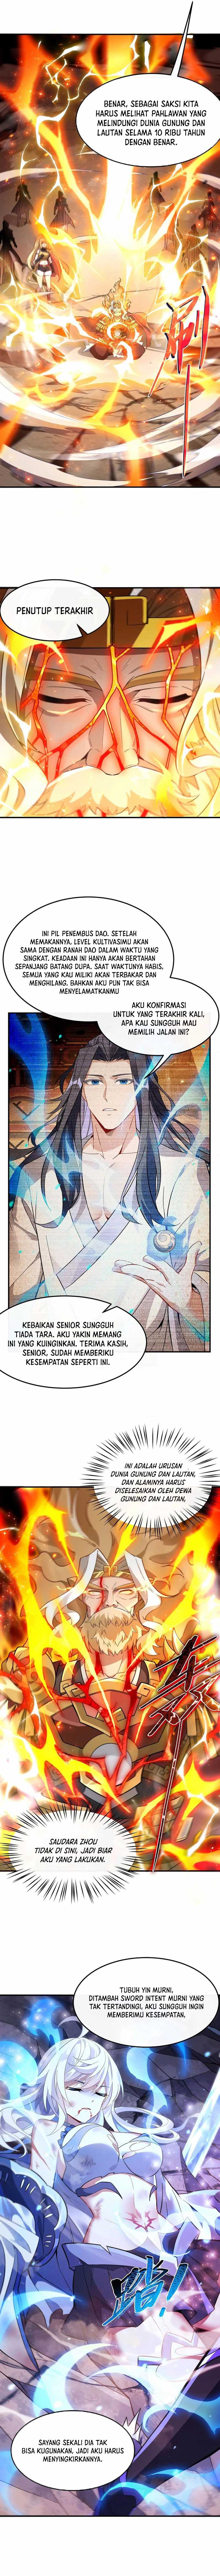 Dilarang COPAS - situs resmi www.mangacanblog.com - Komik my female apprentices are all big shots from the future 244 - chapter 244 245 Indonesia my female apprentices are all big shots from the future 244 - chapter 244 Terbaru 8|Baca Manga Komik Indonesia|Mangacan